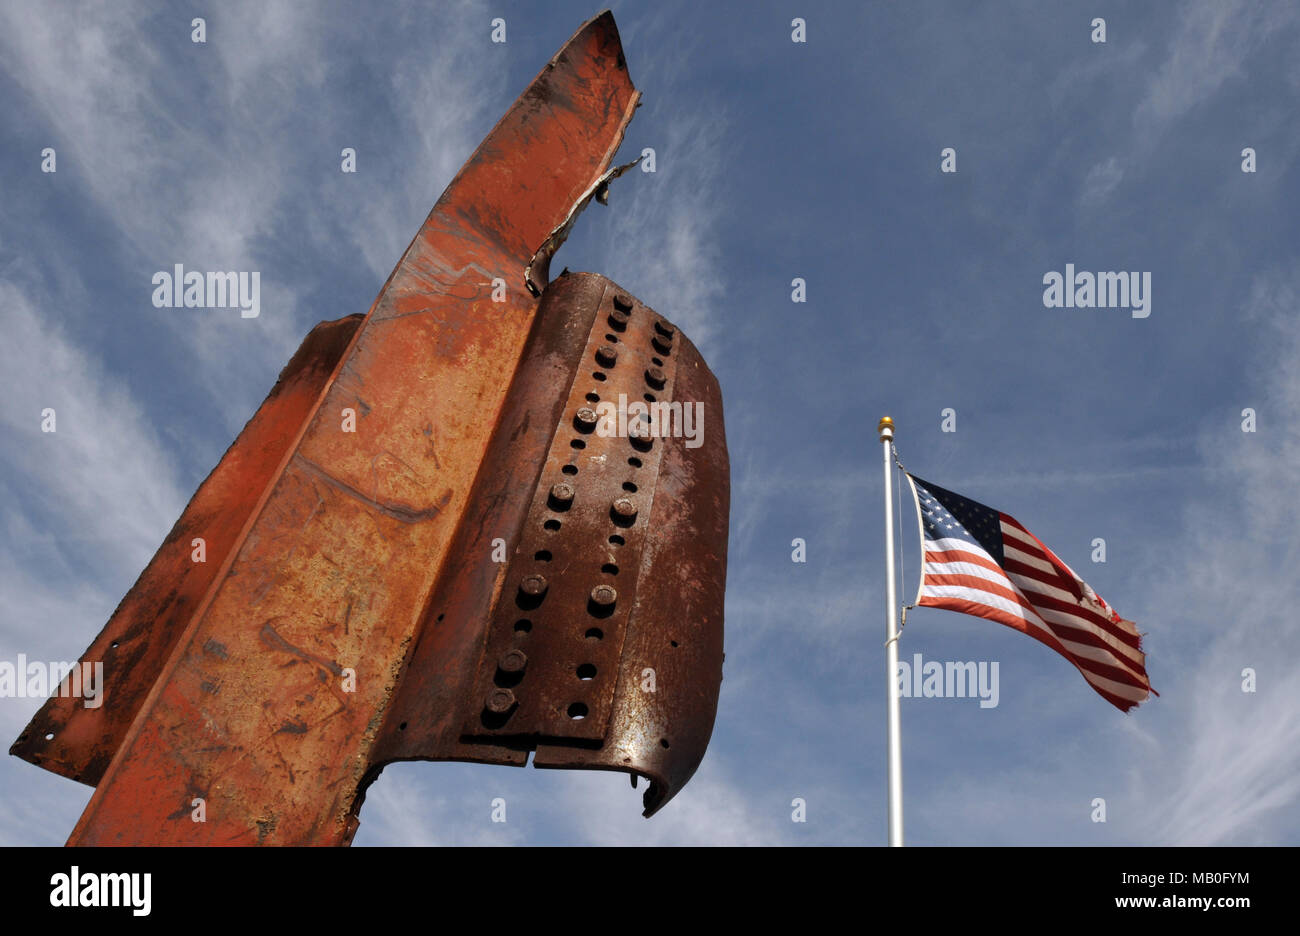 One of two steel beams recovered from the wreckage of the World Trade Center that form part of the 9/11 Remembrance Garden in Winslow, Arizona. Stock Photo